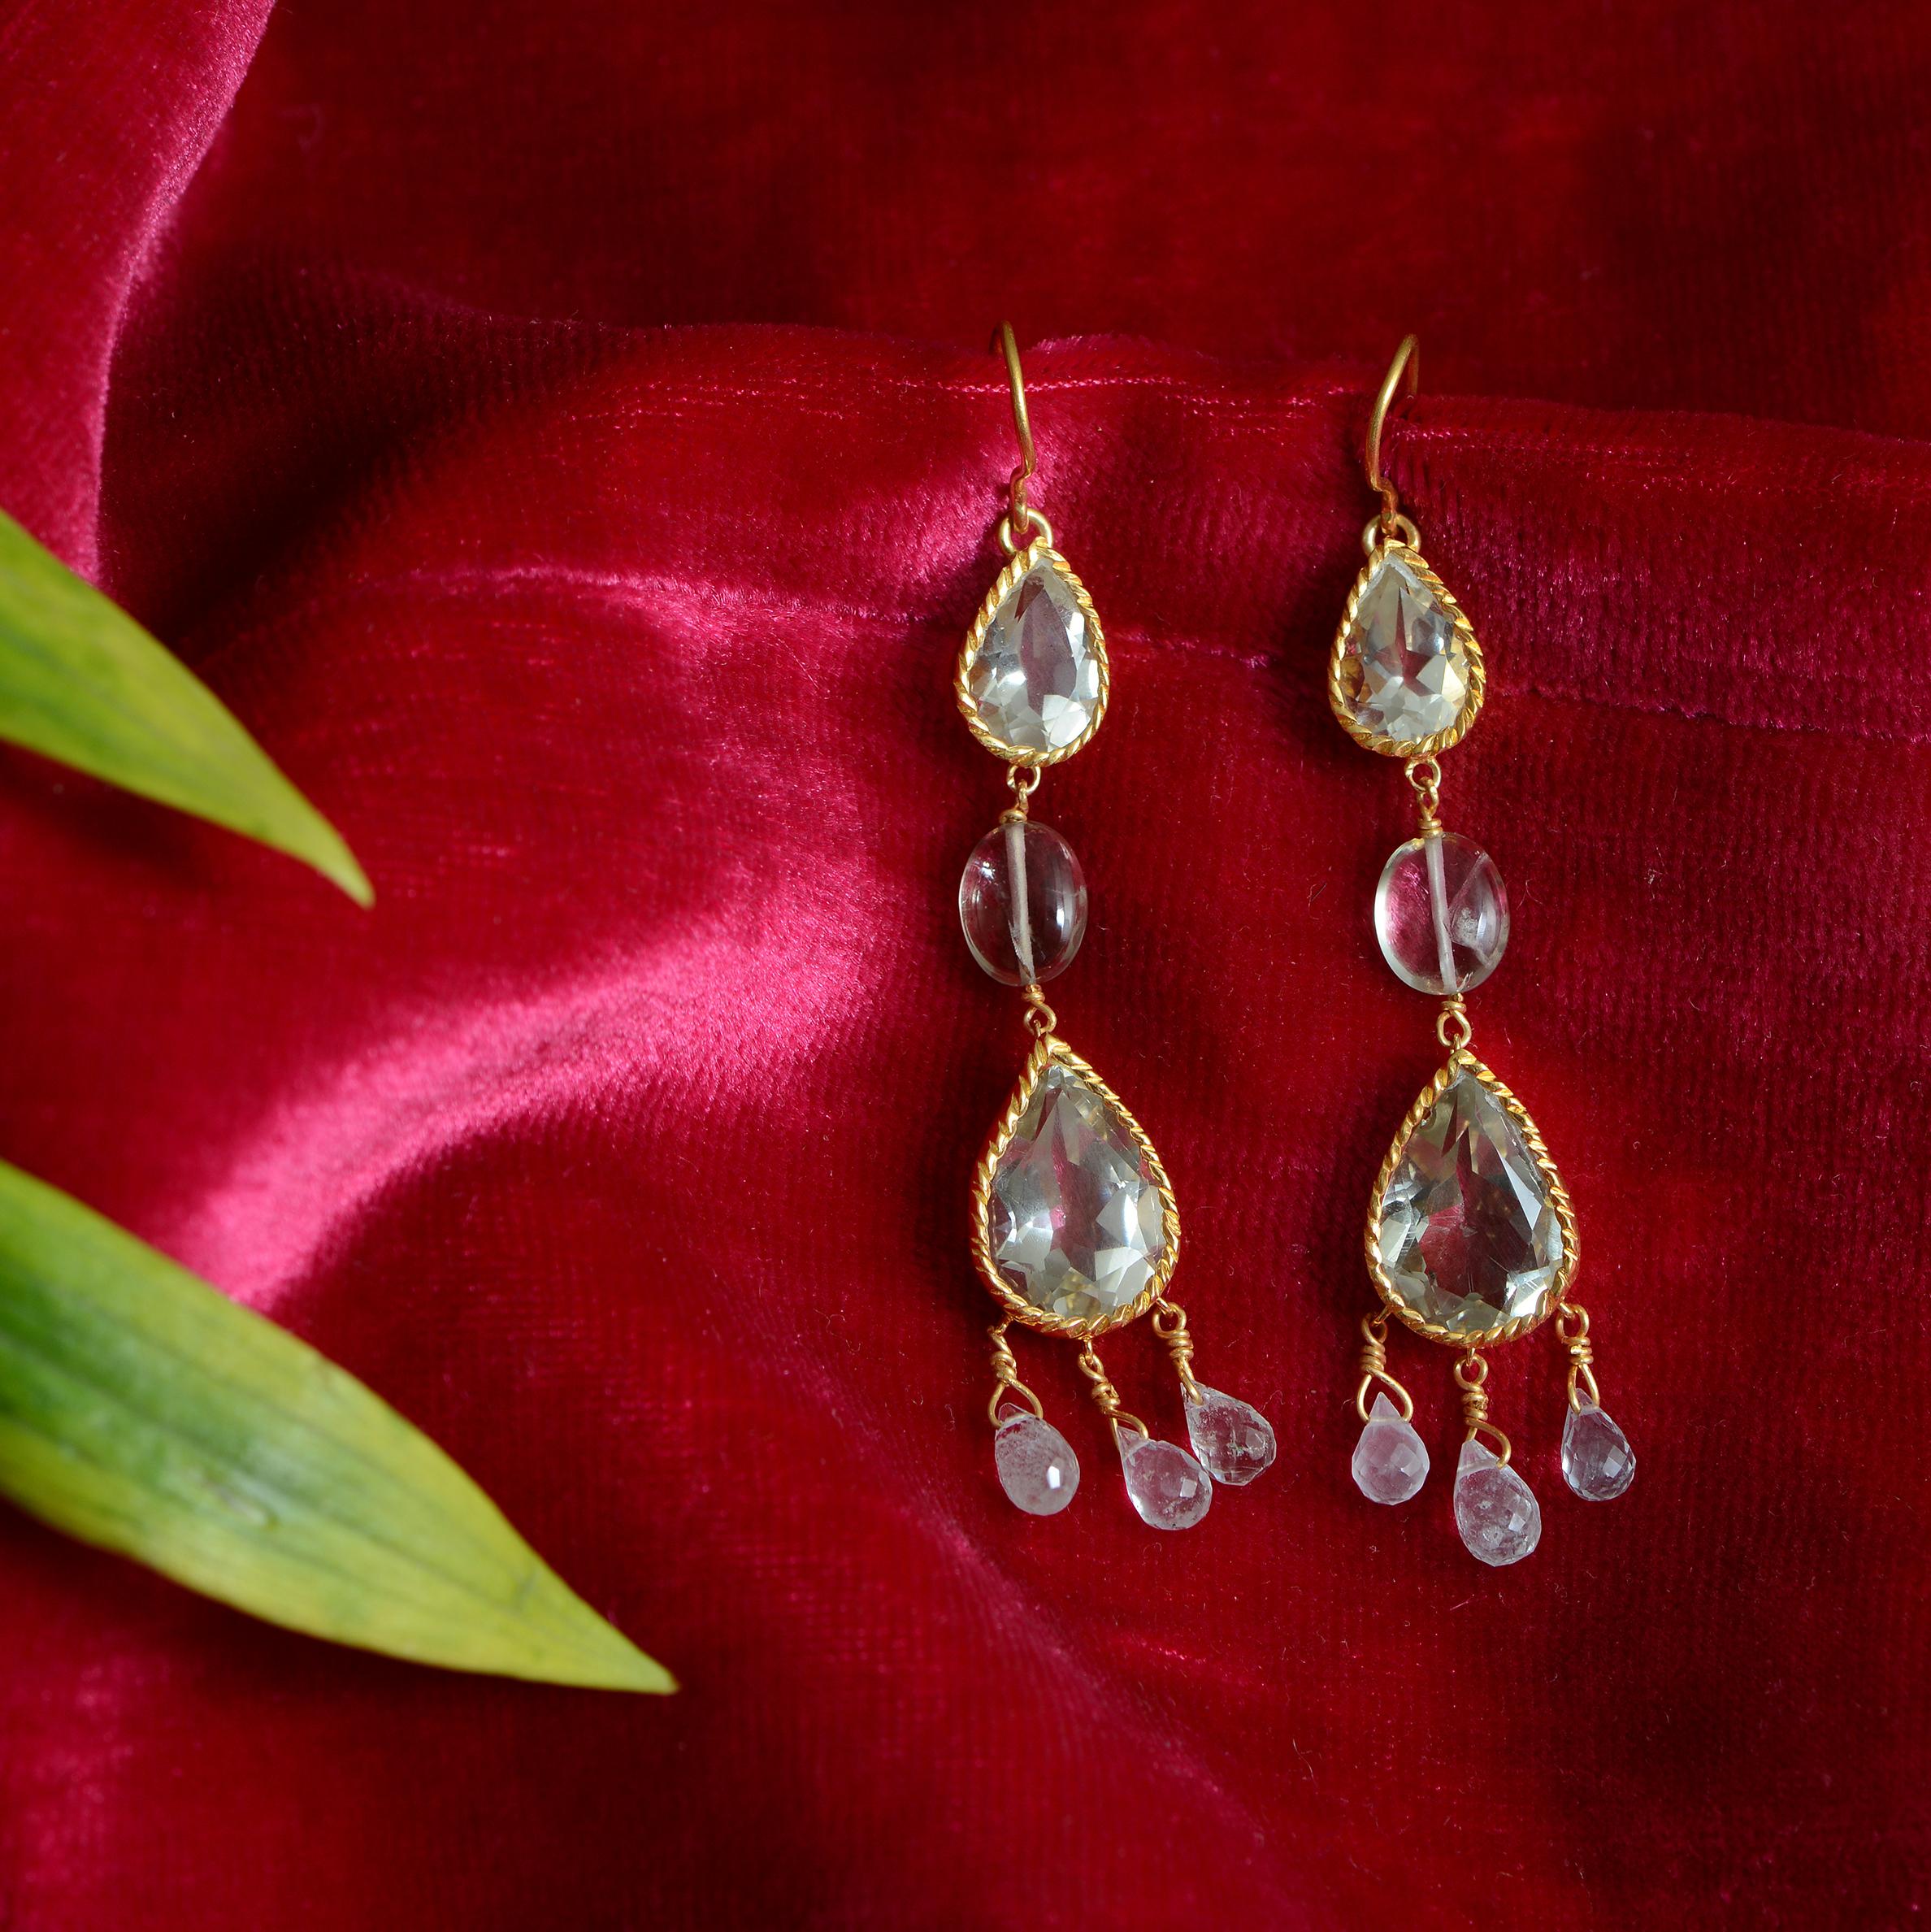 These beautiful teardrop shaped green amethyst dangle earrings have been handmade in our workshops and have a central aquamarine and aquamarine drops.
They are made in sterling silver coated with 24kt gold plate and are limited edition.
The earrings